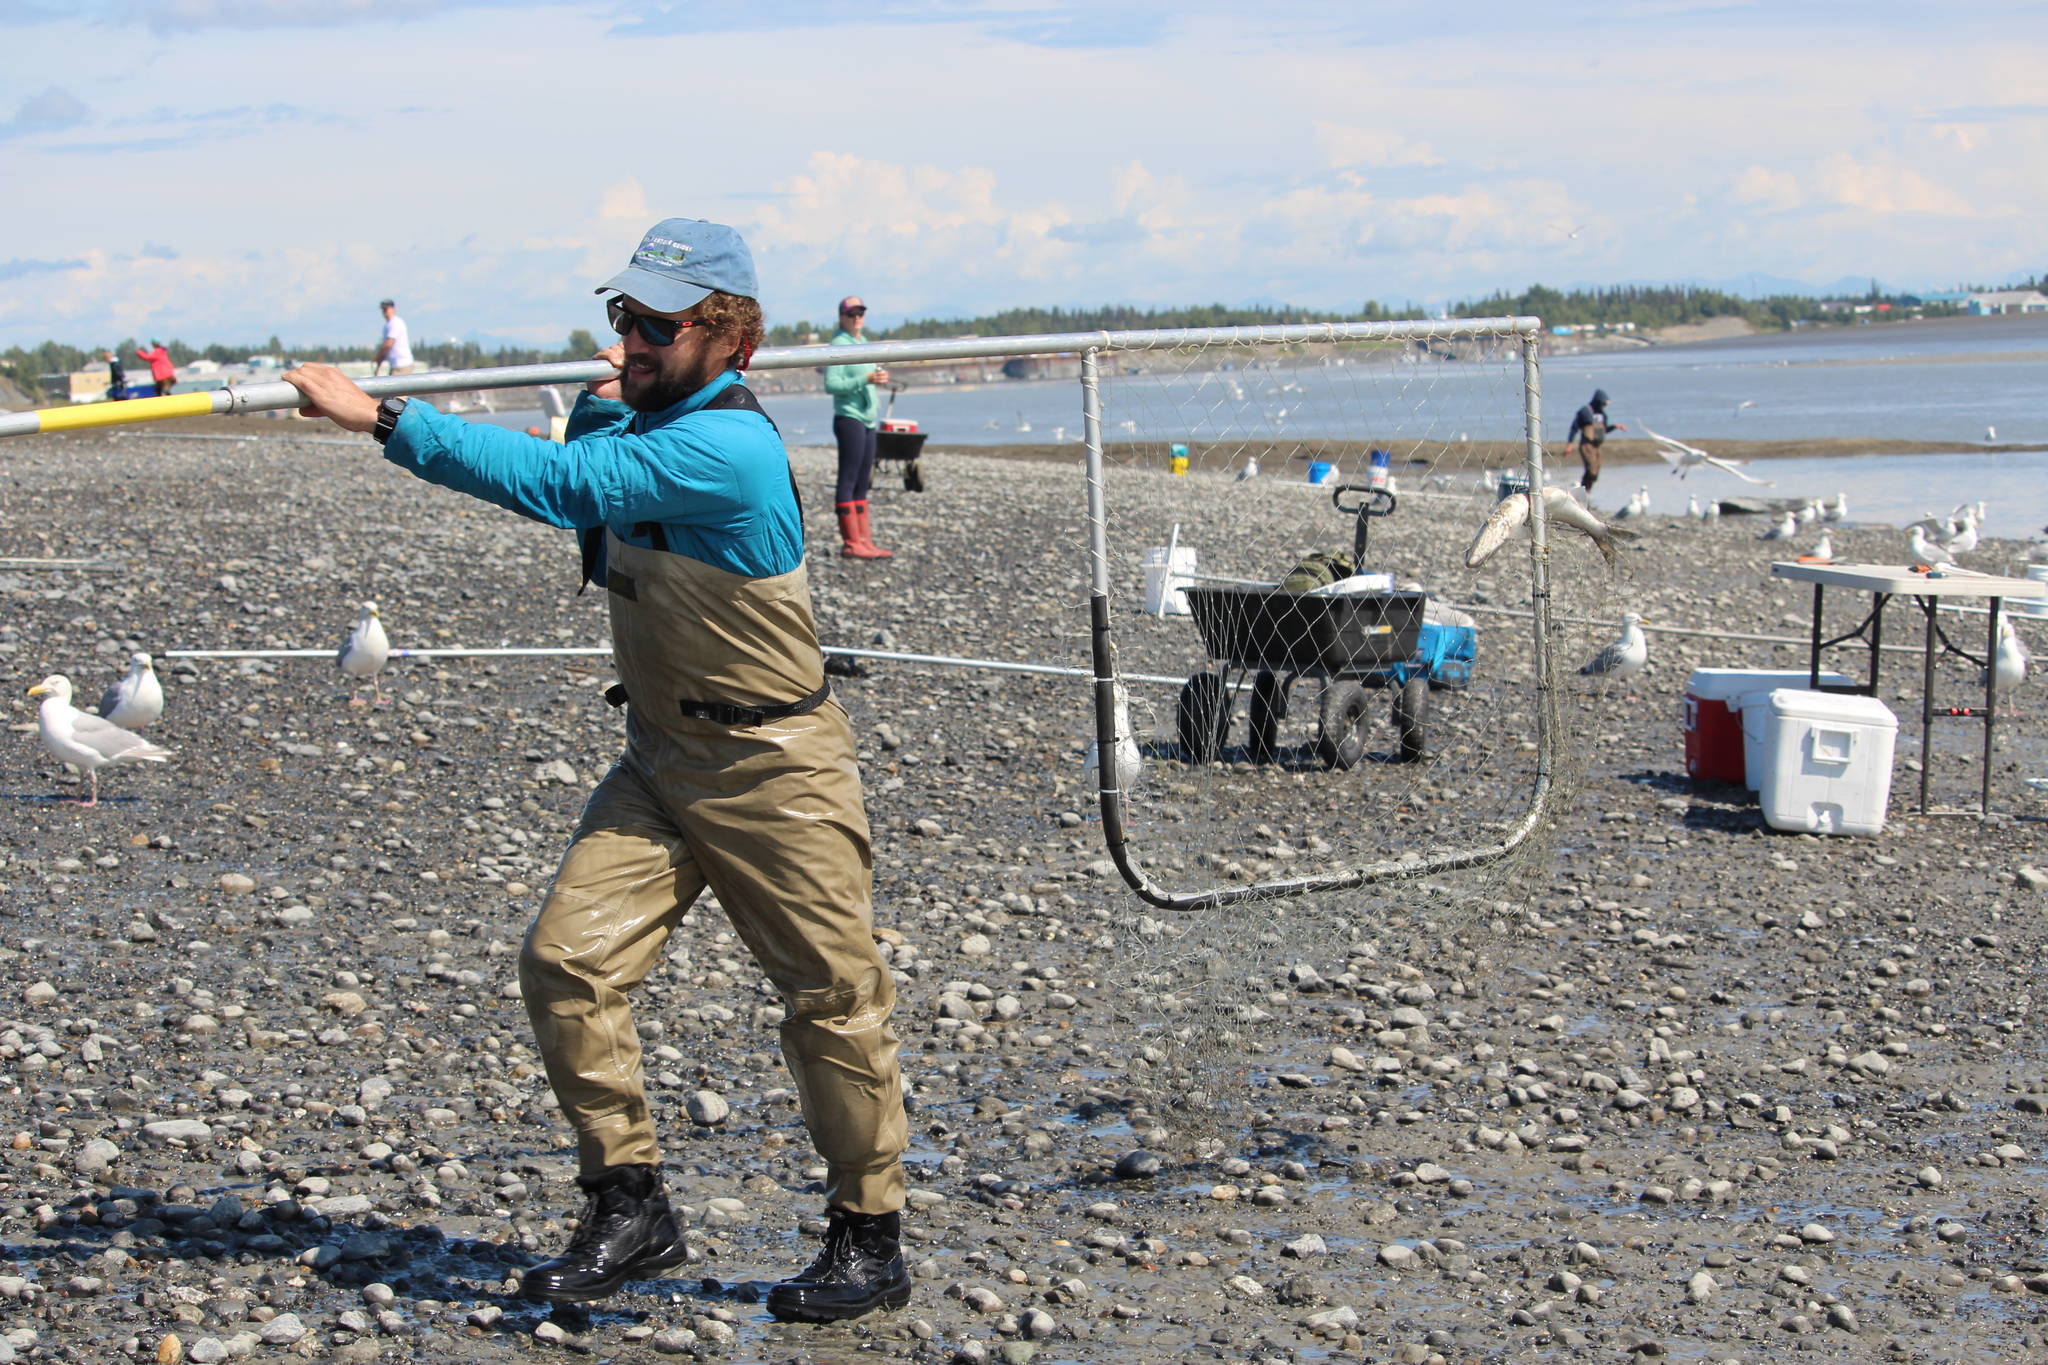 Shawn Dick of Talkneetna carries a fresh catch out of the water while dipnetting on the Kenai Beach on July 10, 2020. (Photo by Brian Mazurek/Peninsula Clarion)